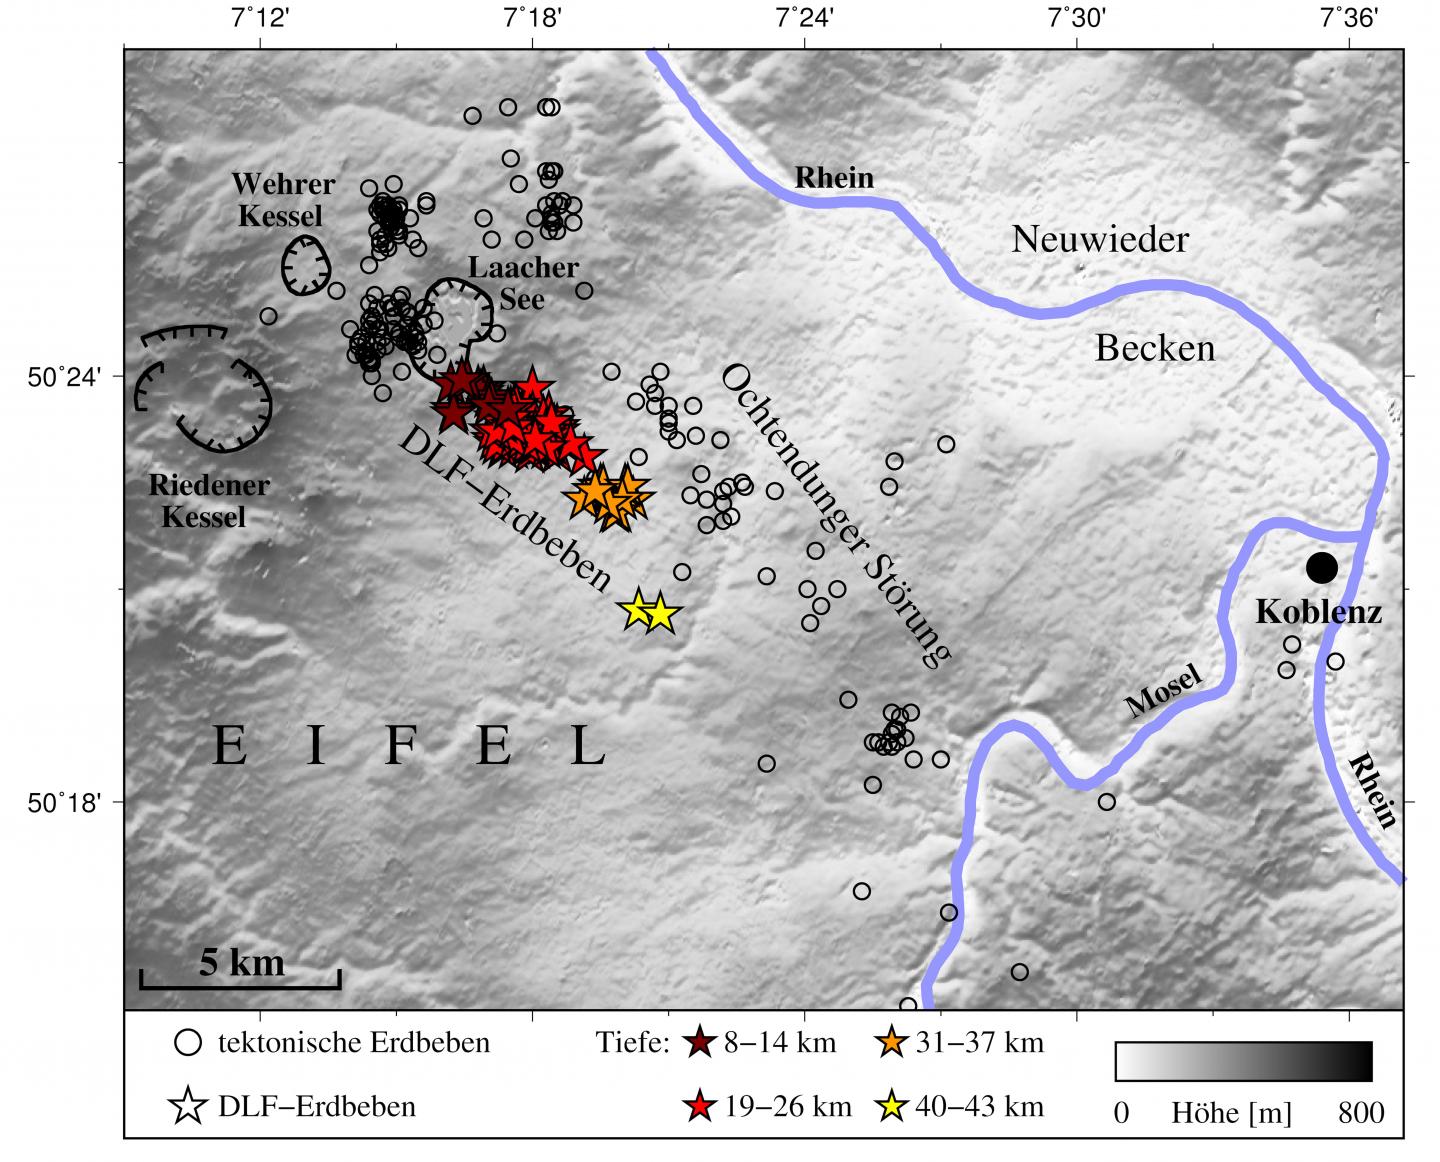 Magmatic Fluids Rise Beneath Laacher See Volcano in Germany